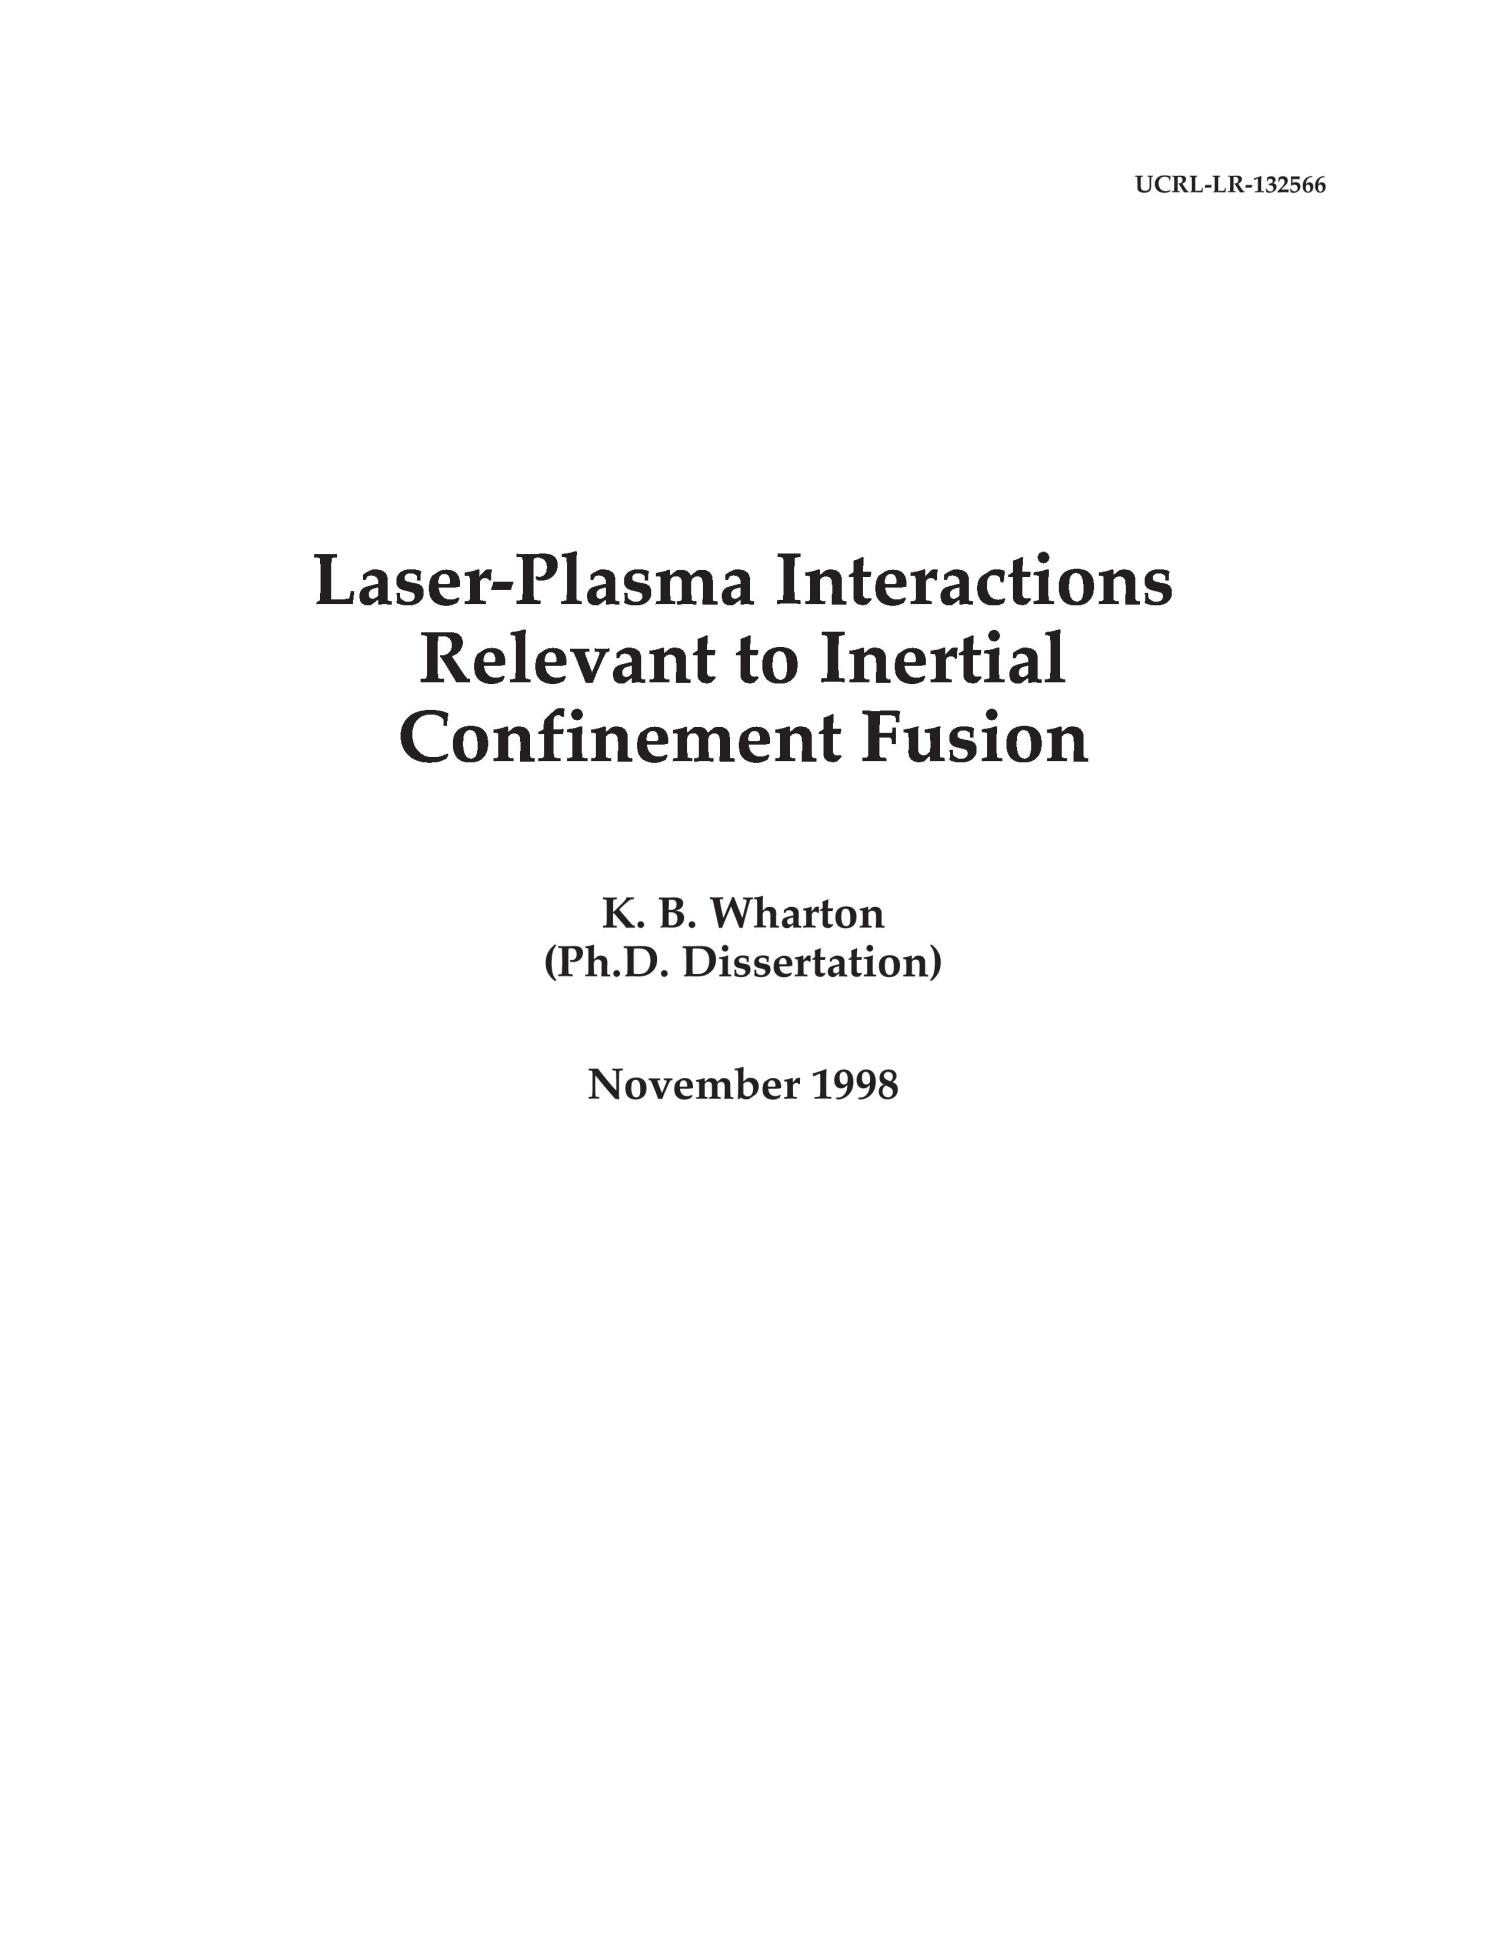 Laser-plasma interactions relevant to Inertial Confinement Fusion
                                                
                                                    [Sequence #]: 1 of 127
                                                